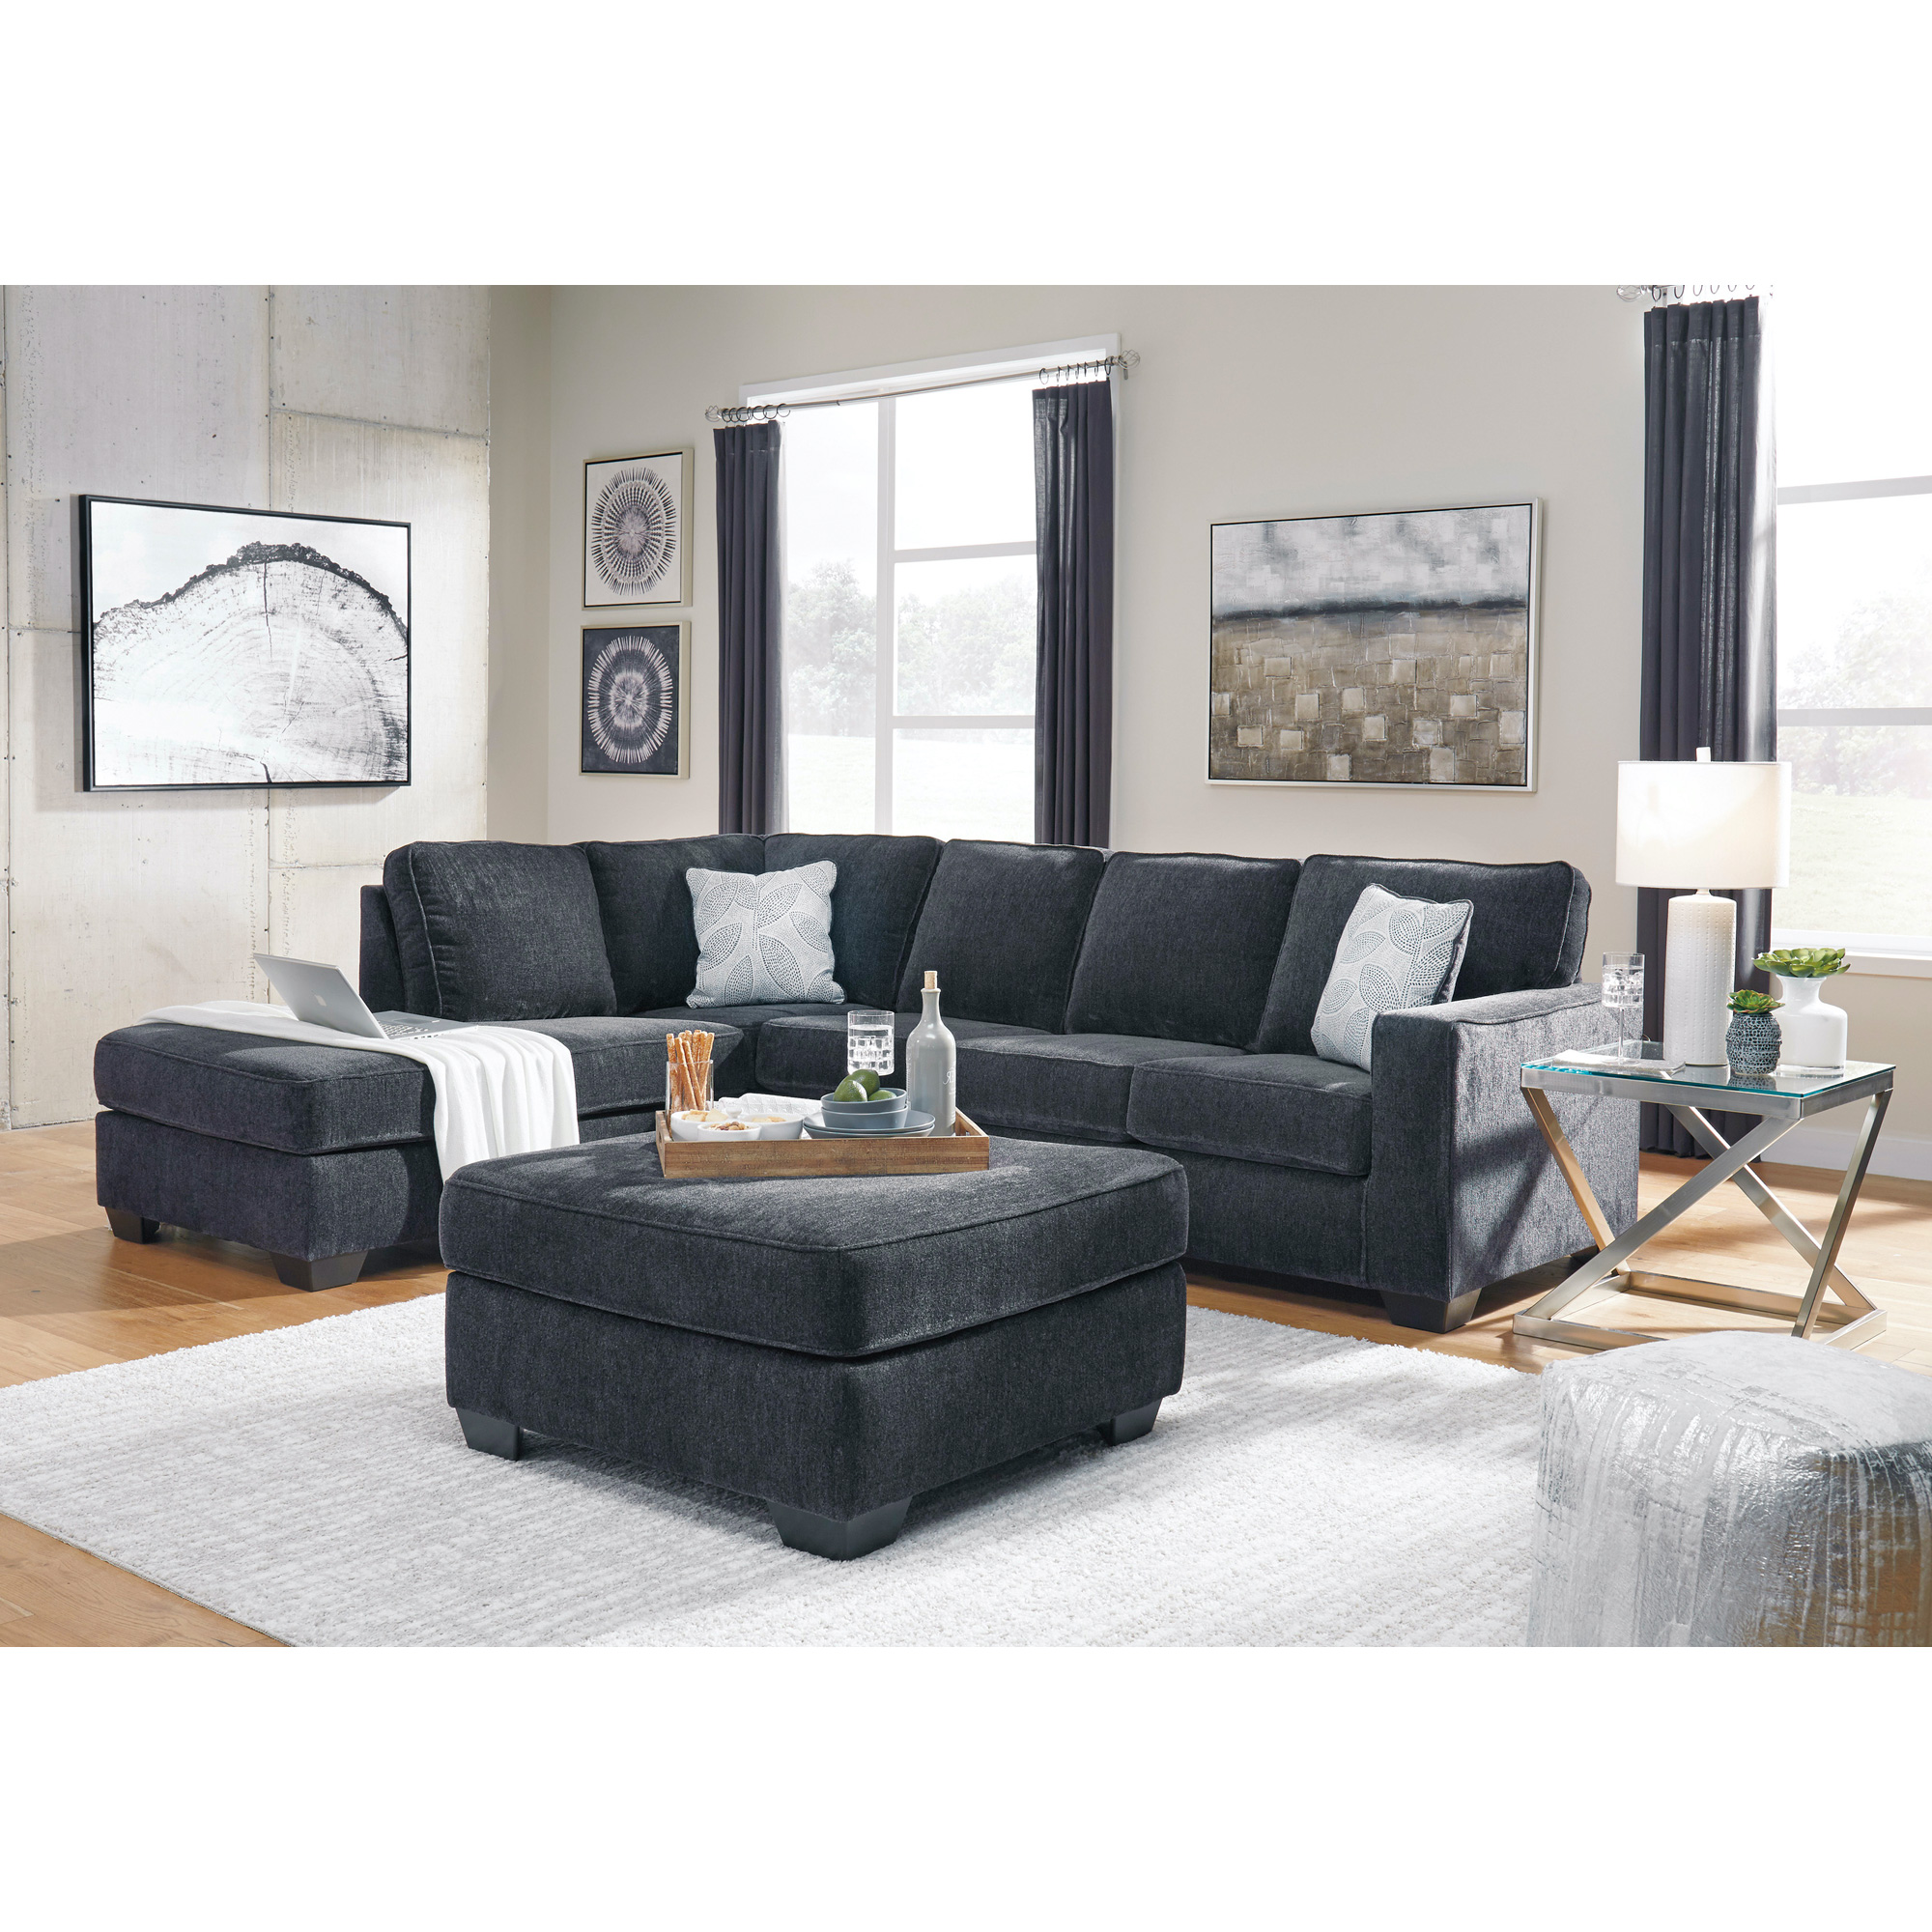 Riles Left Chaise Sectional Living